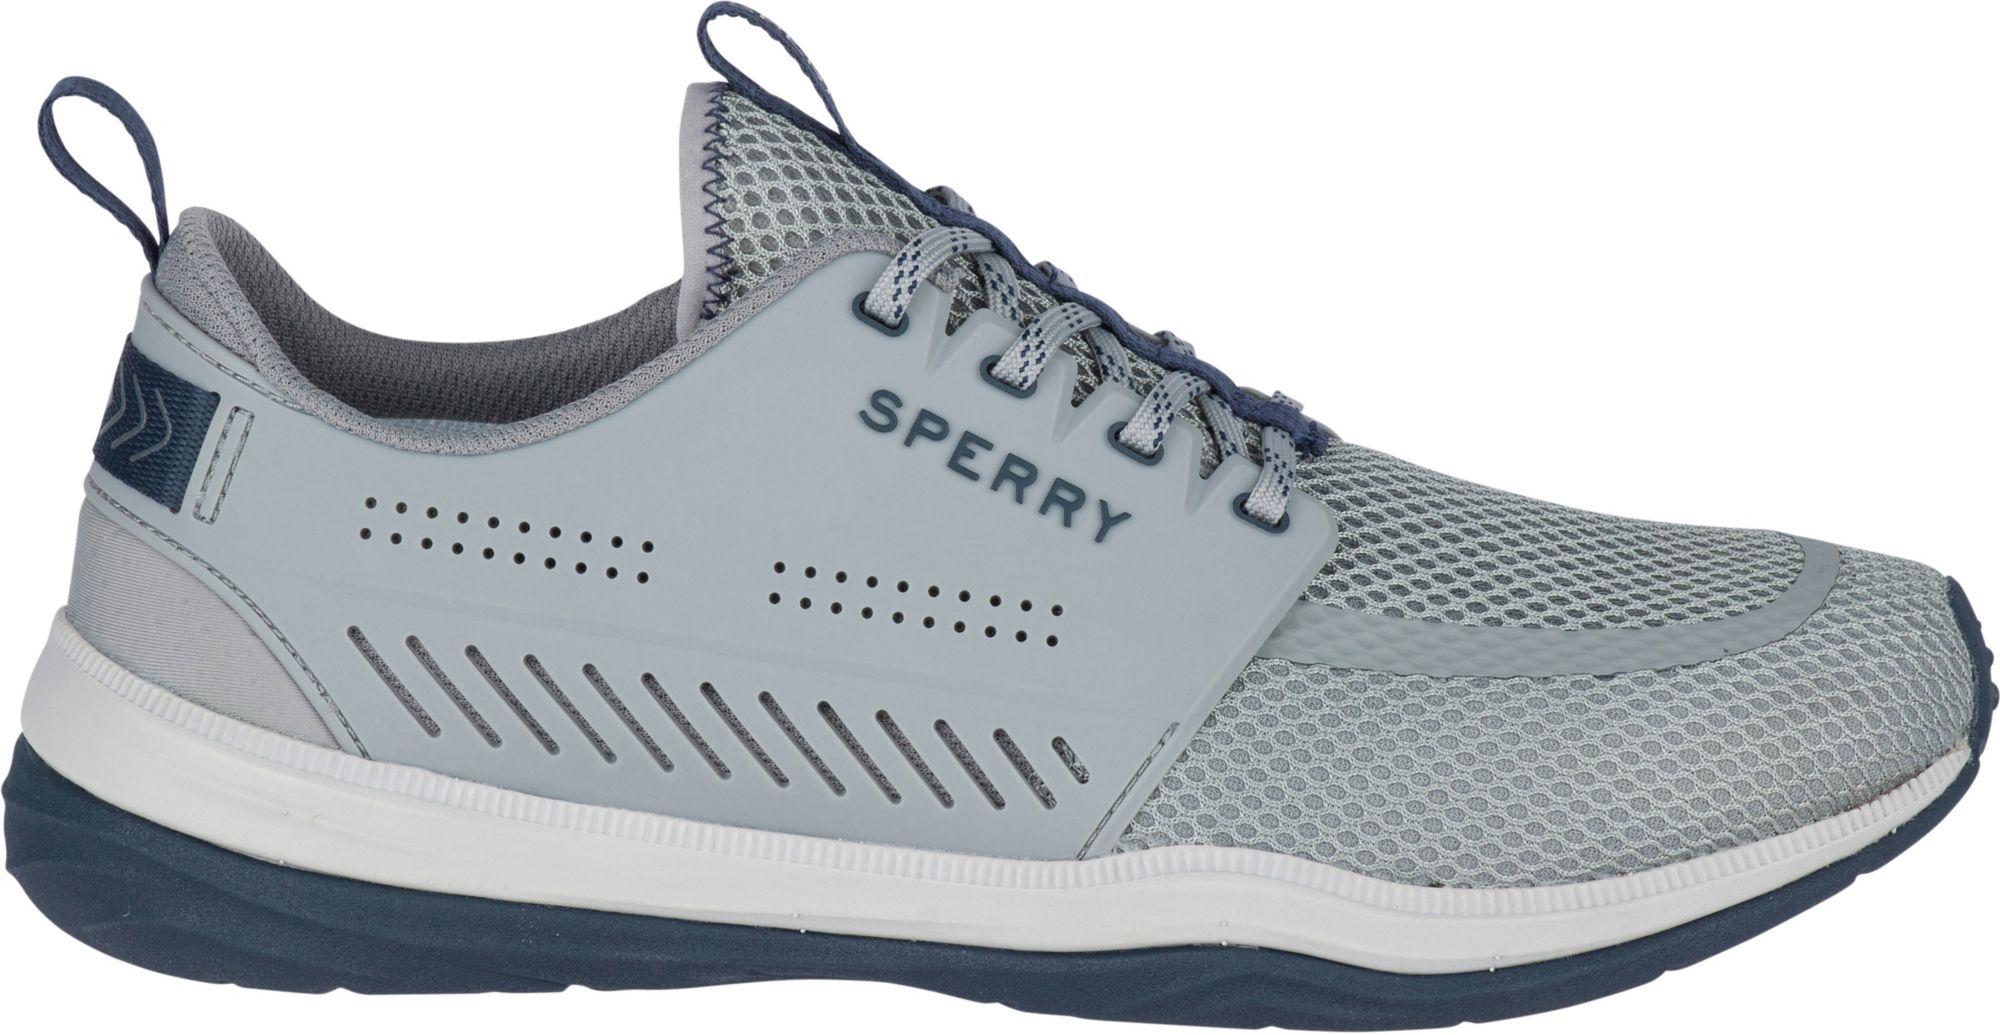 sperry h2o shoes